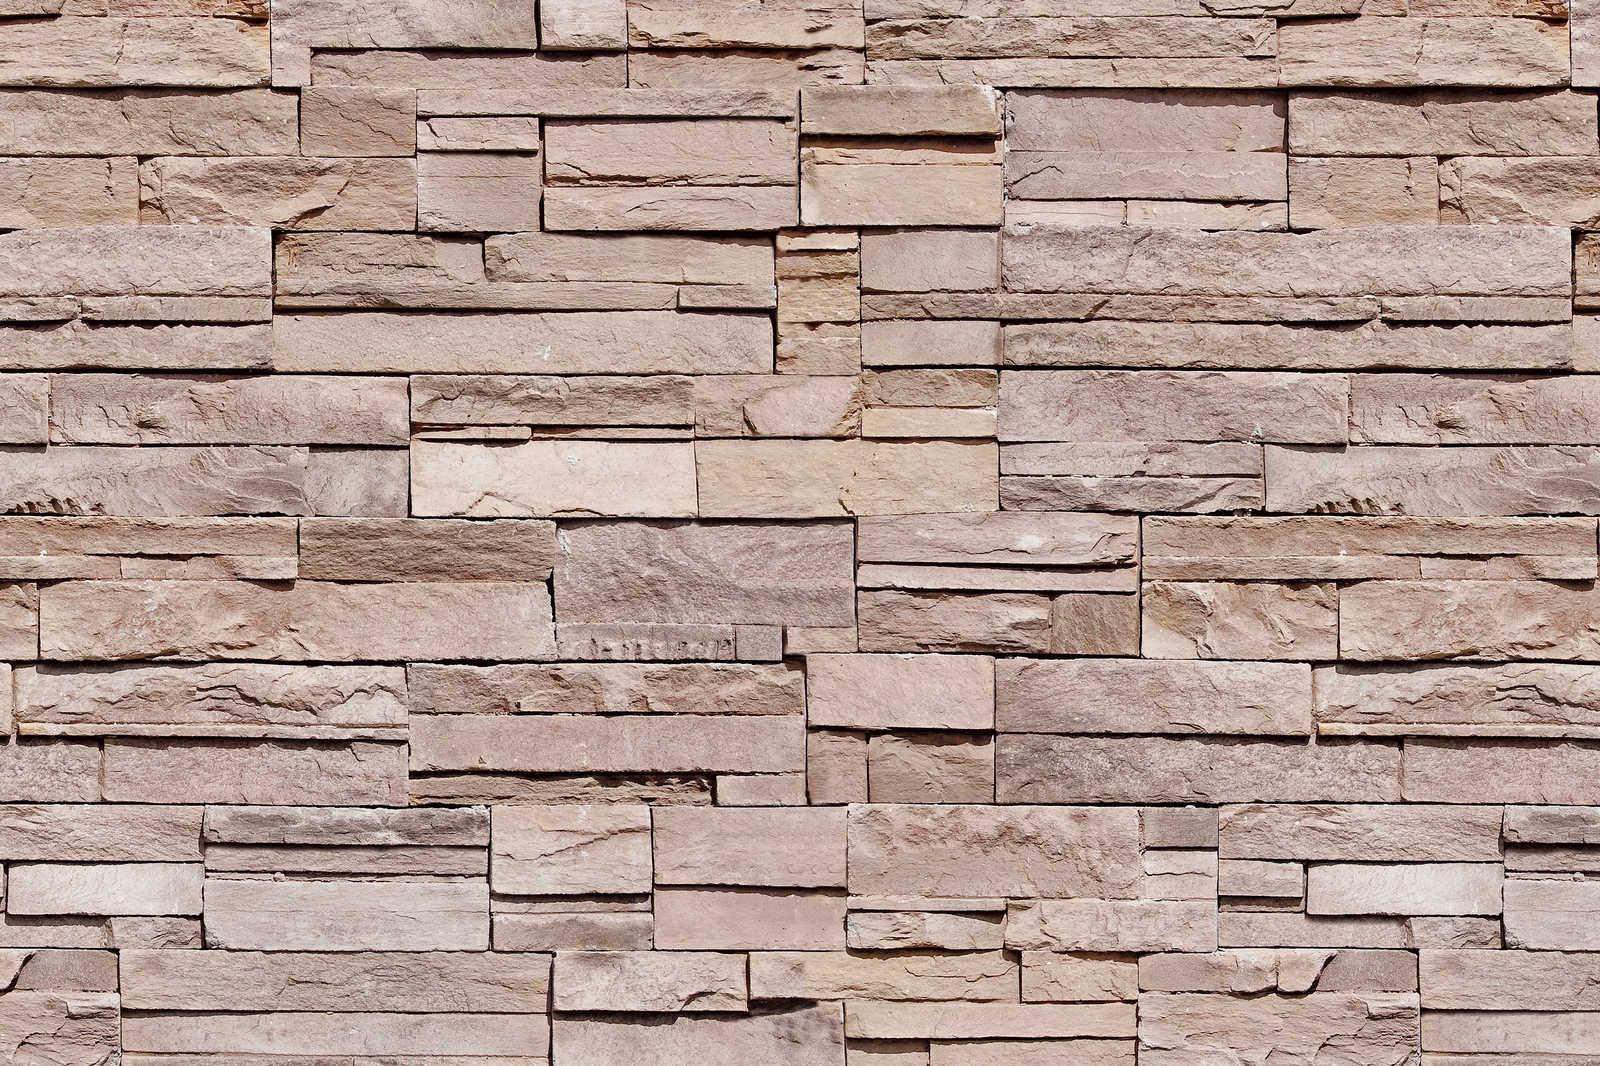             Canvas painting 3D stone look, light brown dry stone wall - 0.90 m x 0.60 m
        